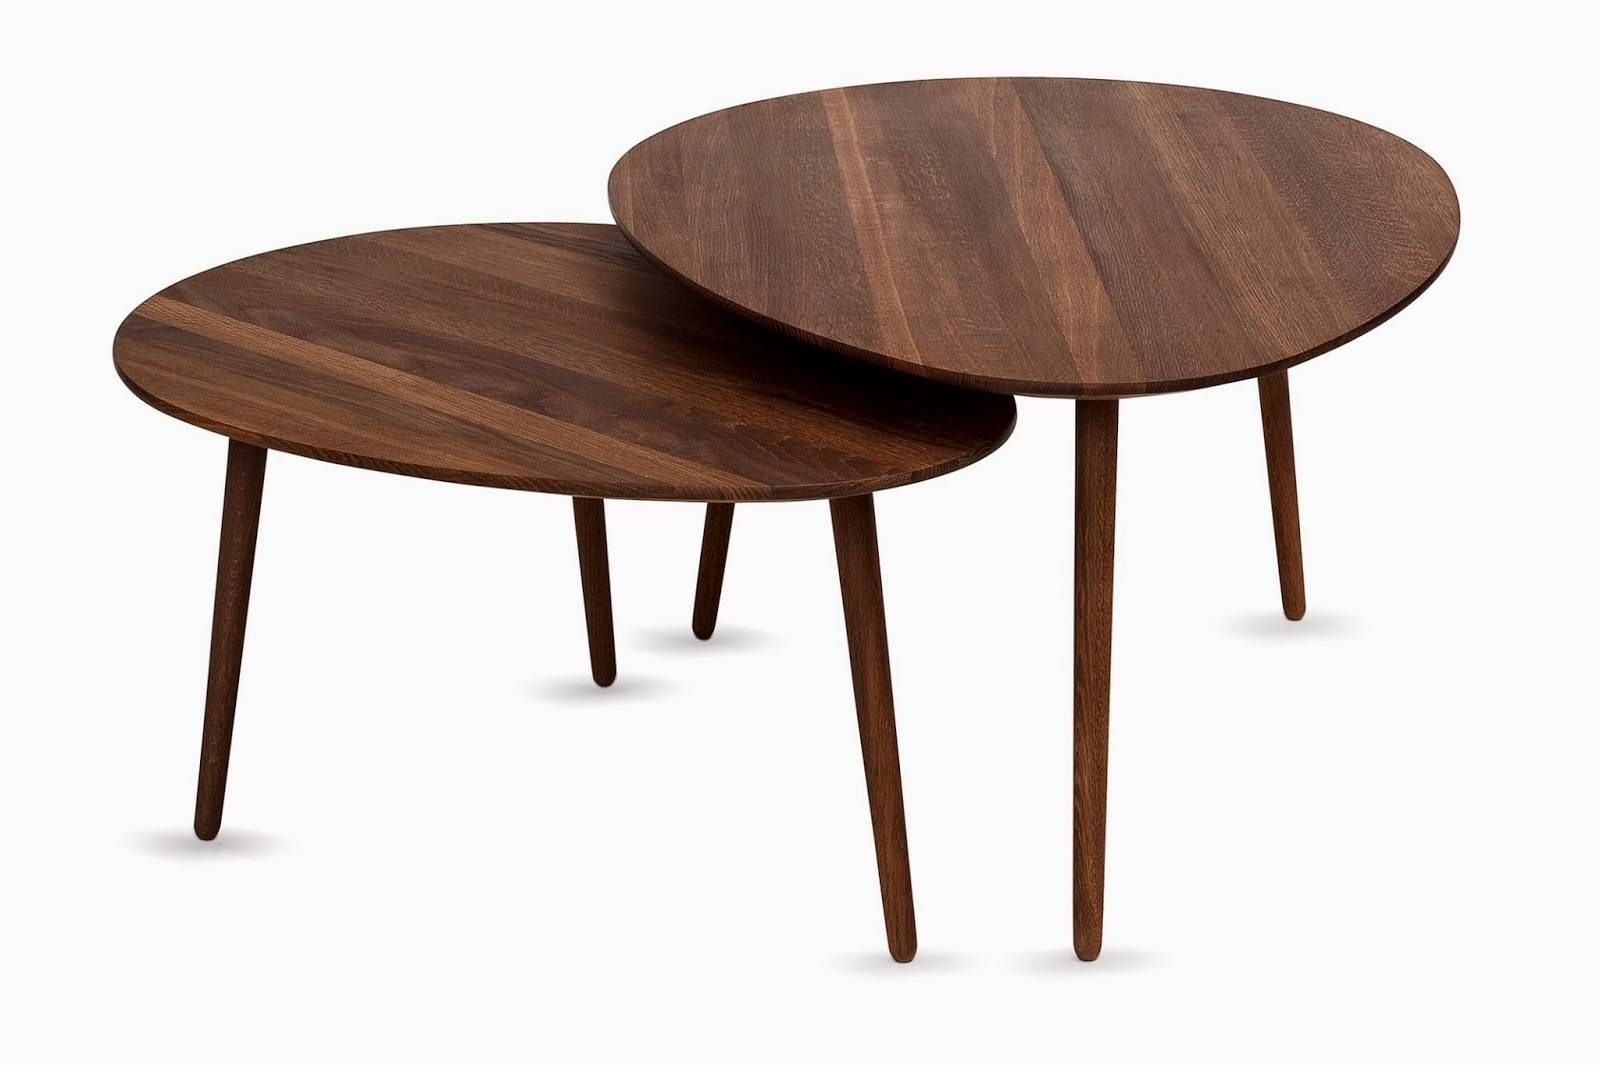 Furniture: Small Oval Coffee Table | Square Industrial Coffee With Regard To Small Coffee Tables (View 7 of 30)